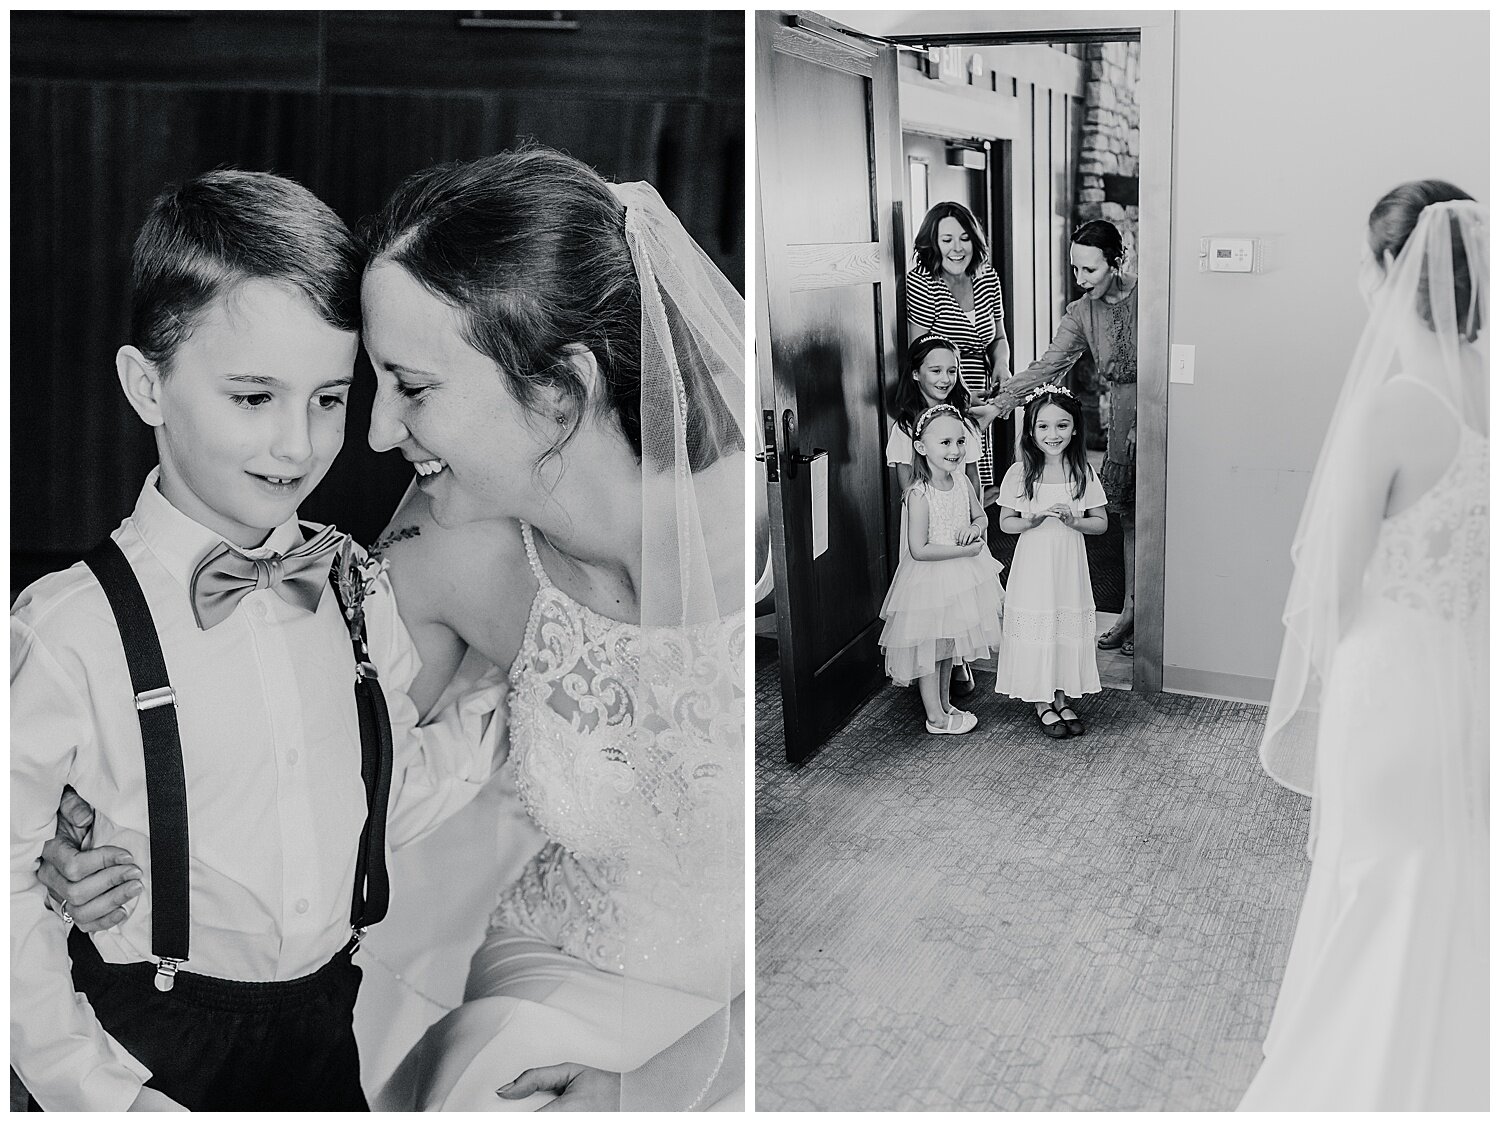  The wedding princesses &amp; ring bearer got a little first look with the bride. They are all soooo sweet!  